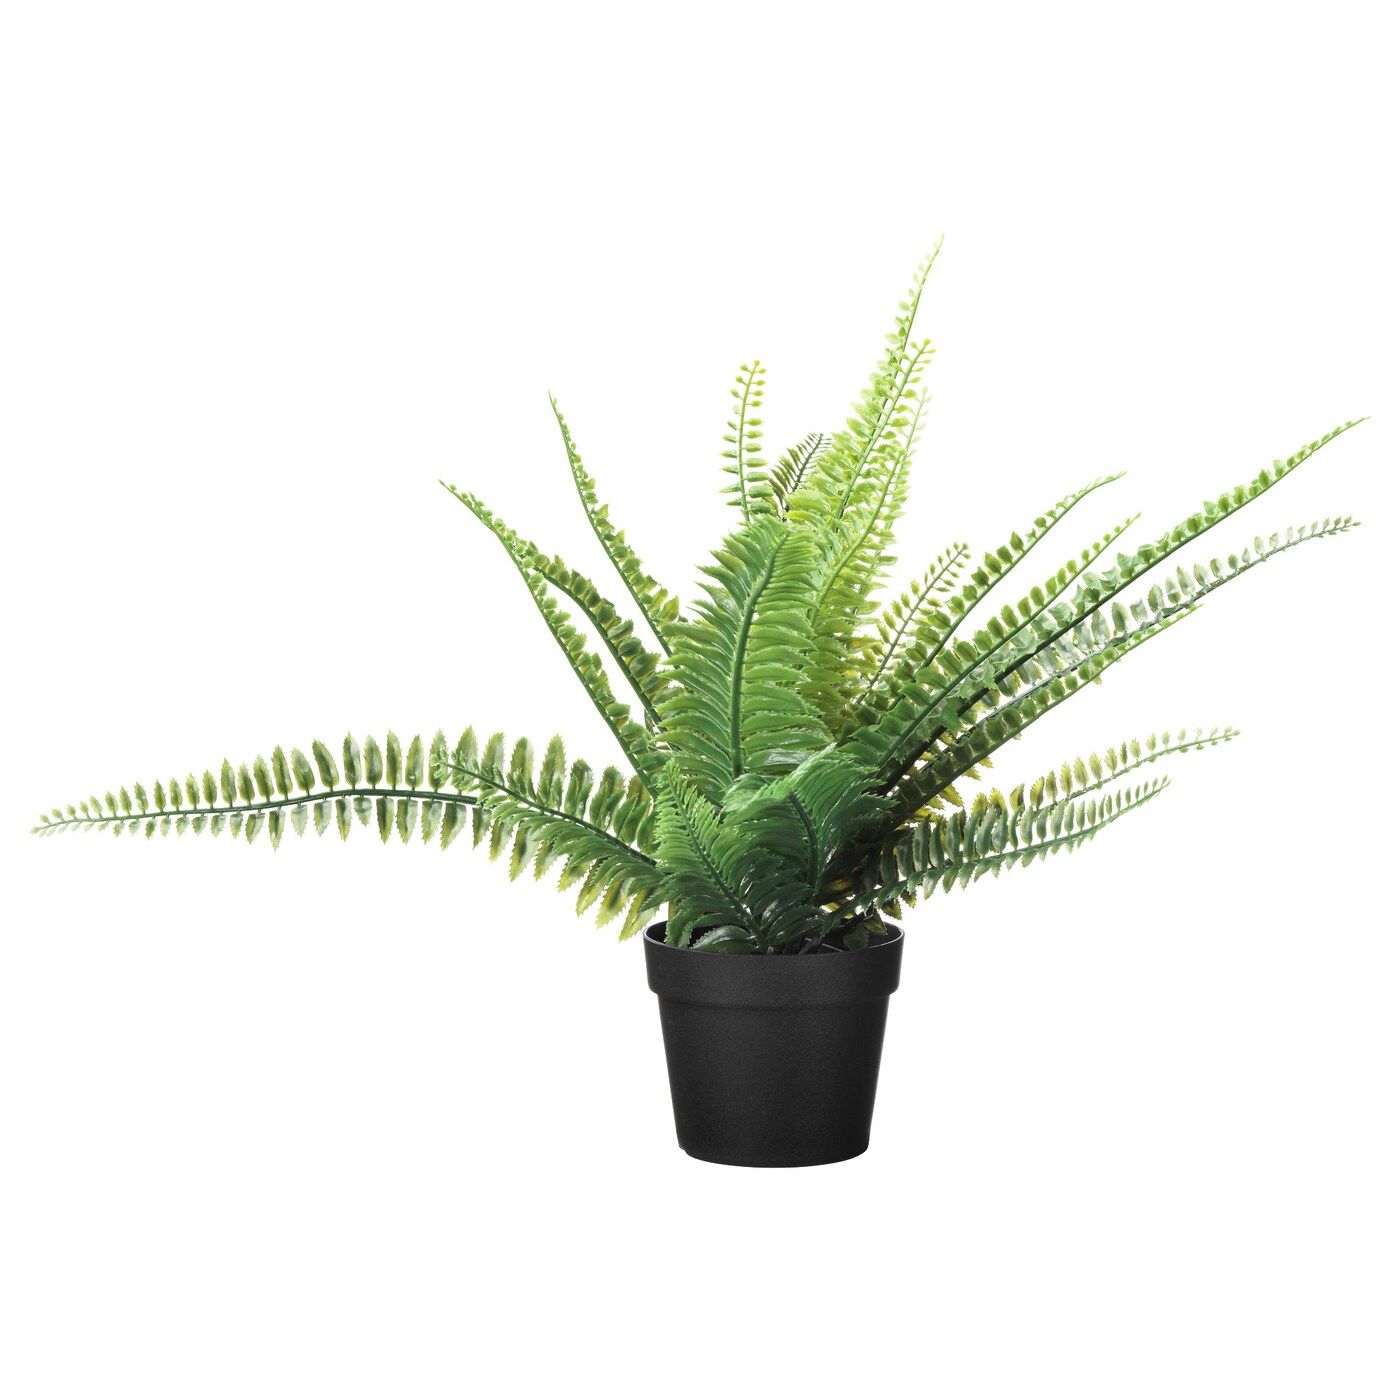 FEJKA Artificial Potted Plant